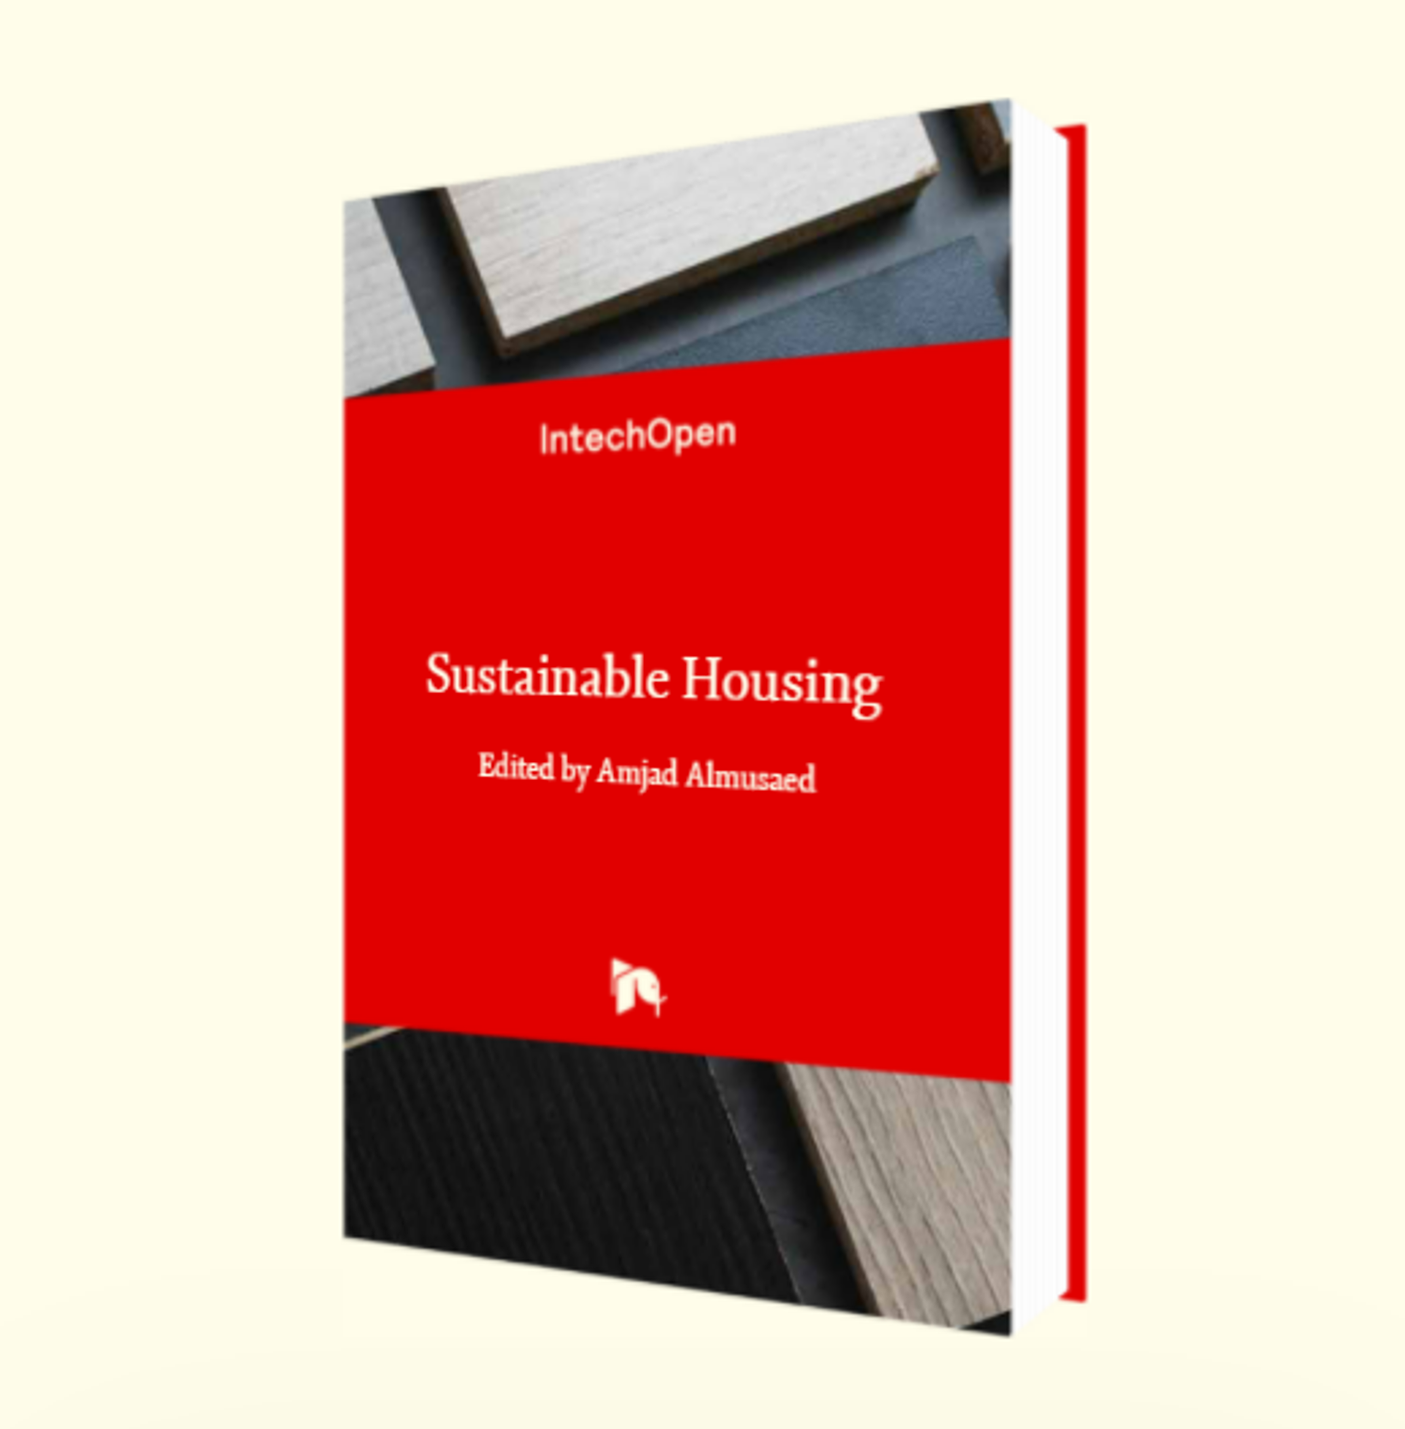 The book ”Sustainable Housing.